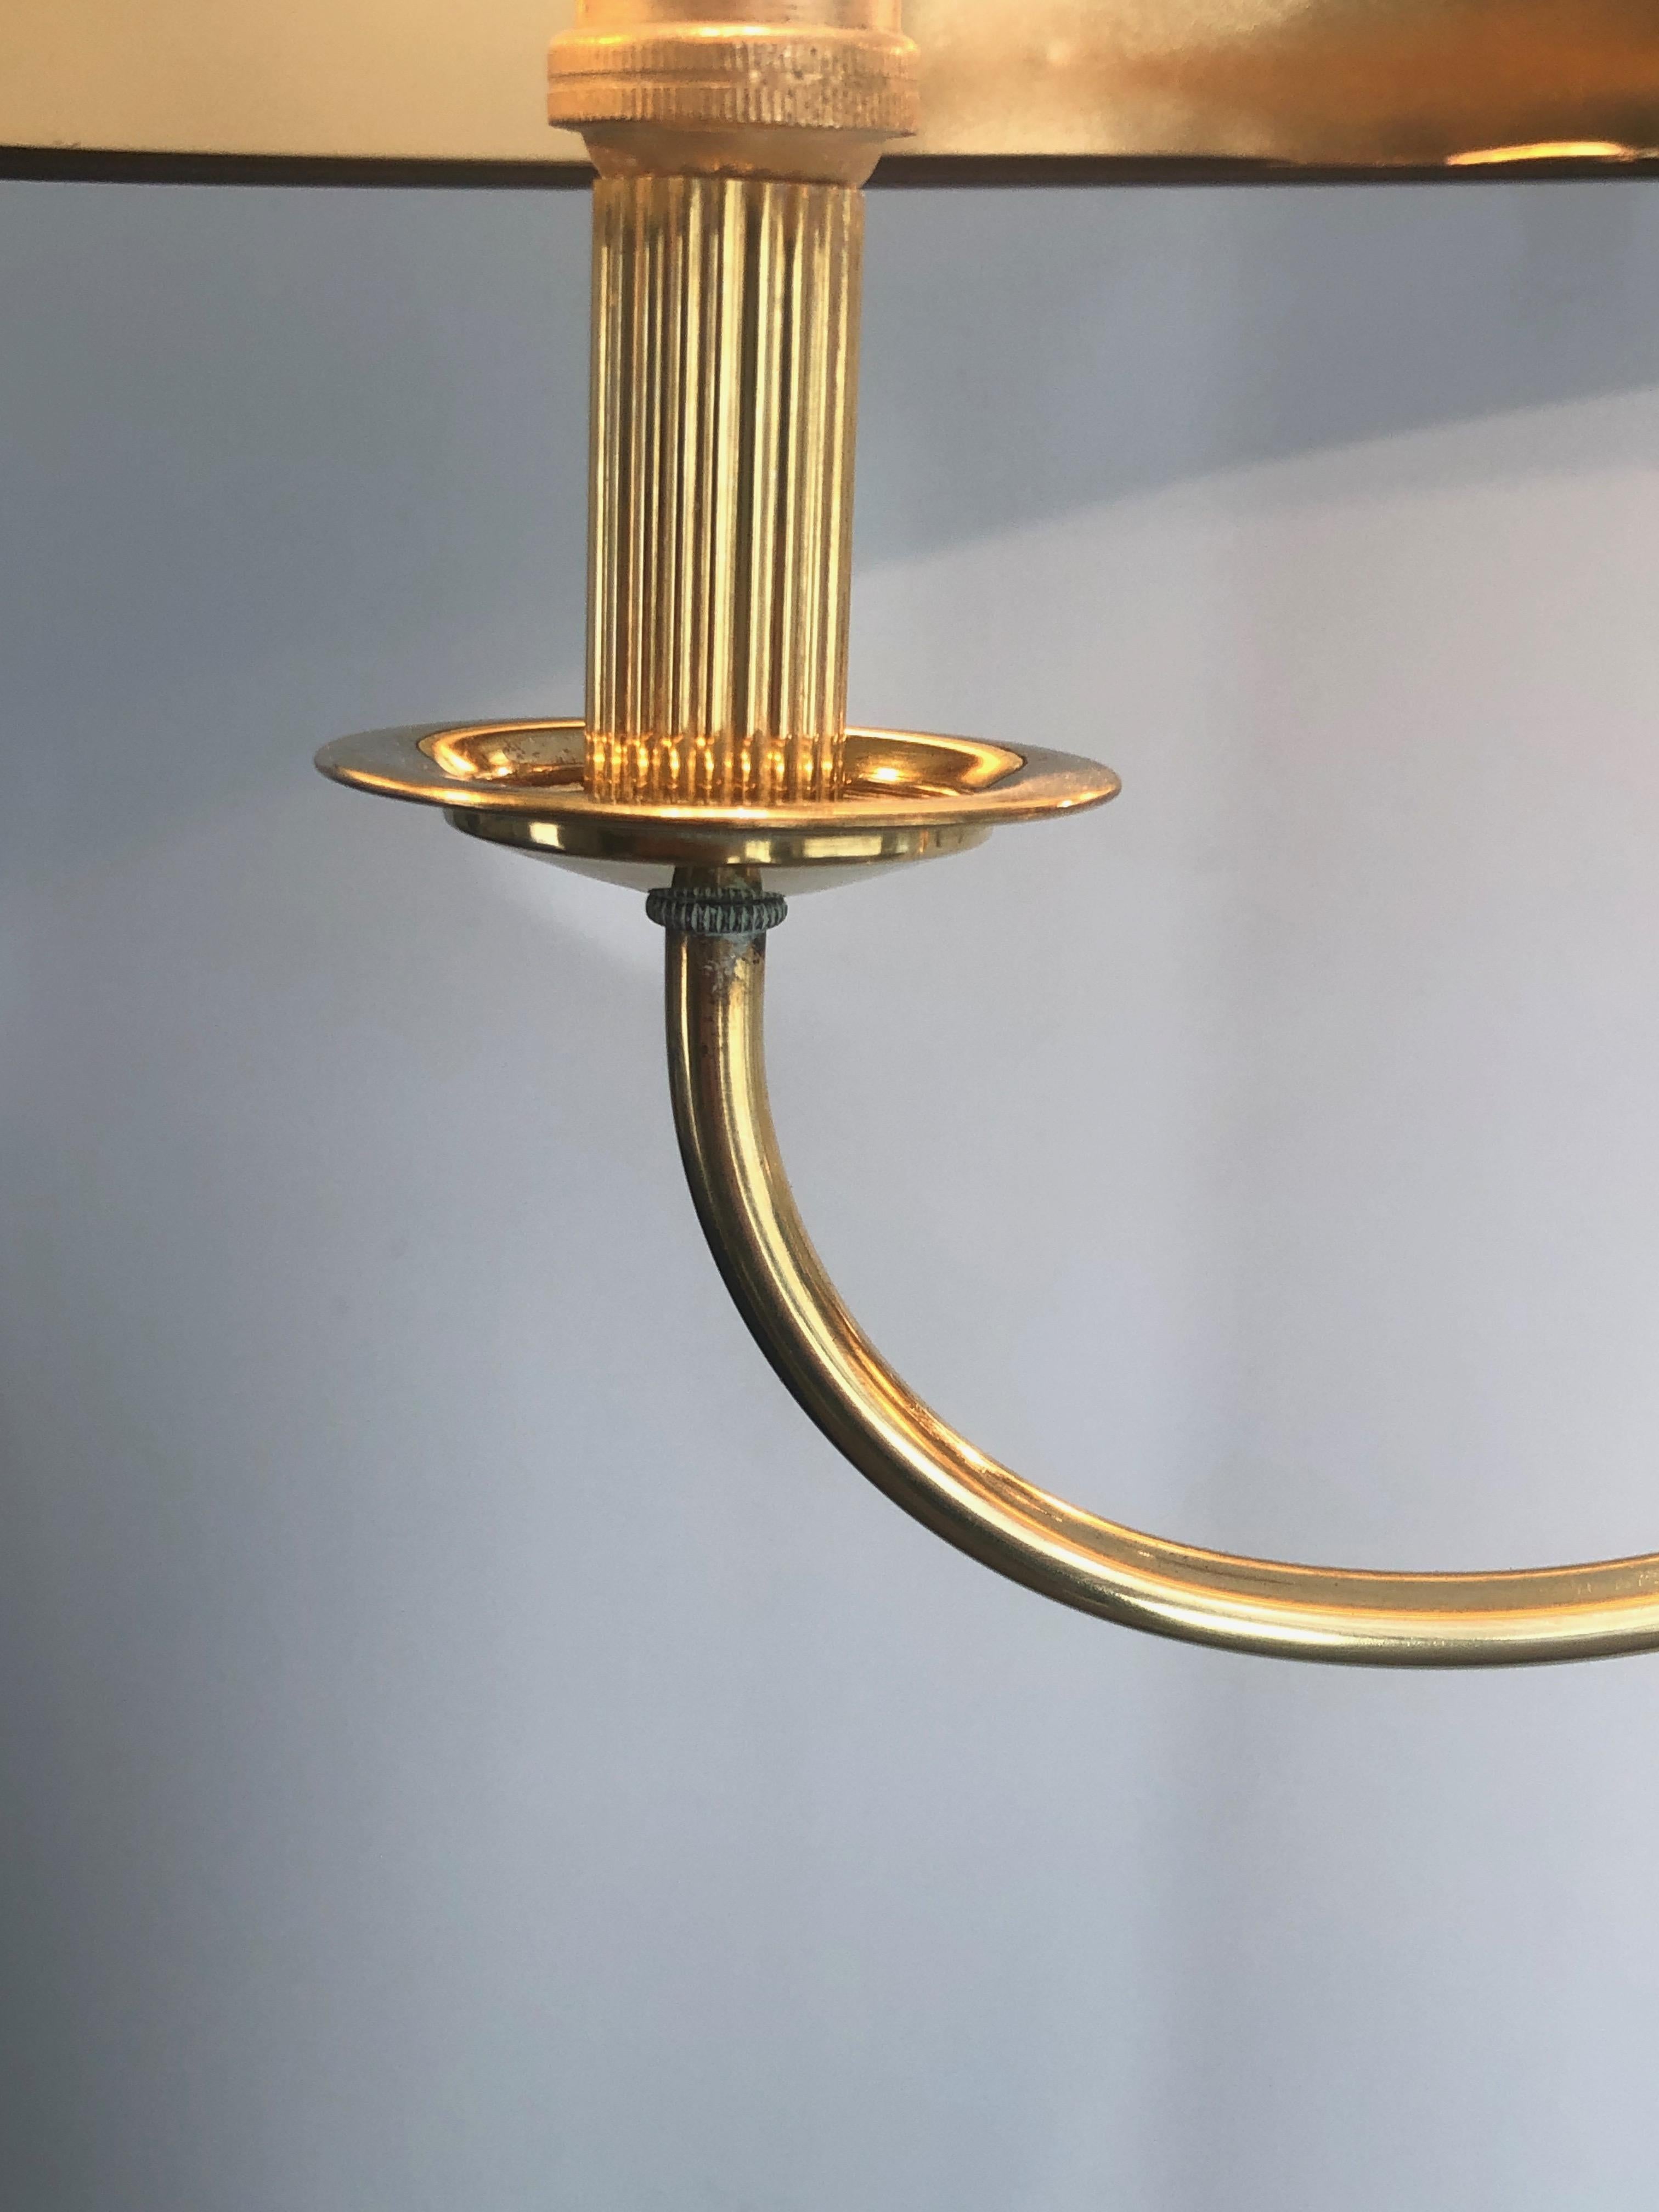 Tripode Brass Floor Lamp with 3 Arms, French Work by Maison Jansen For Sale 2